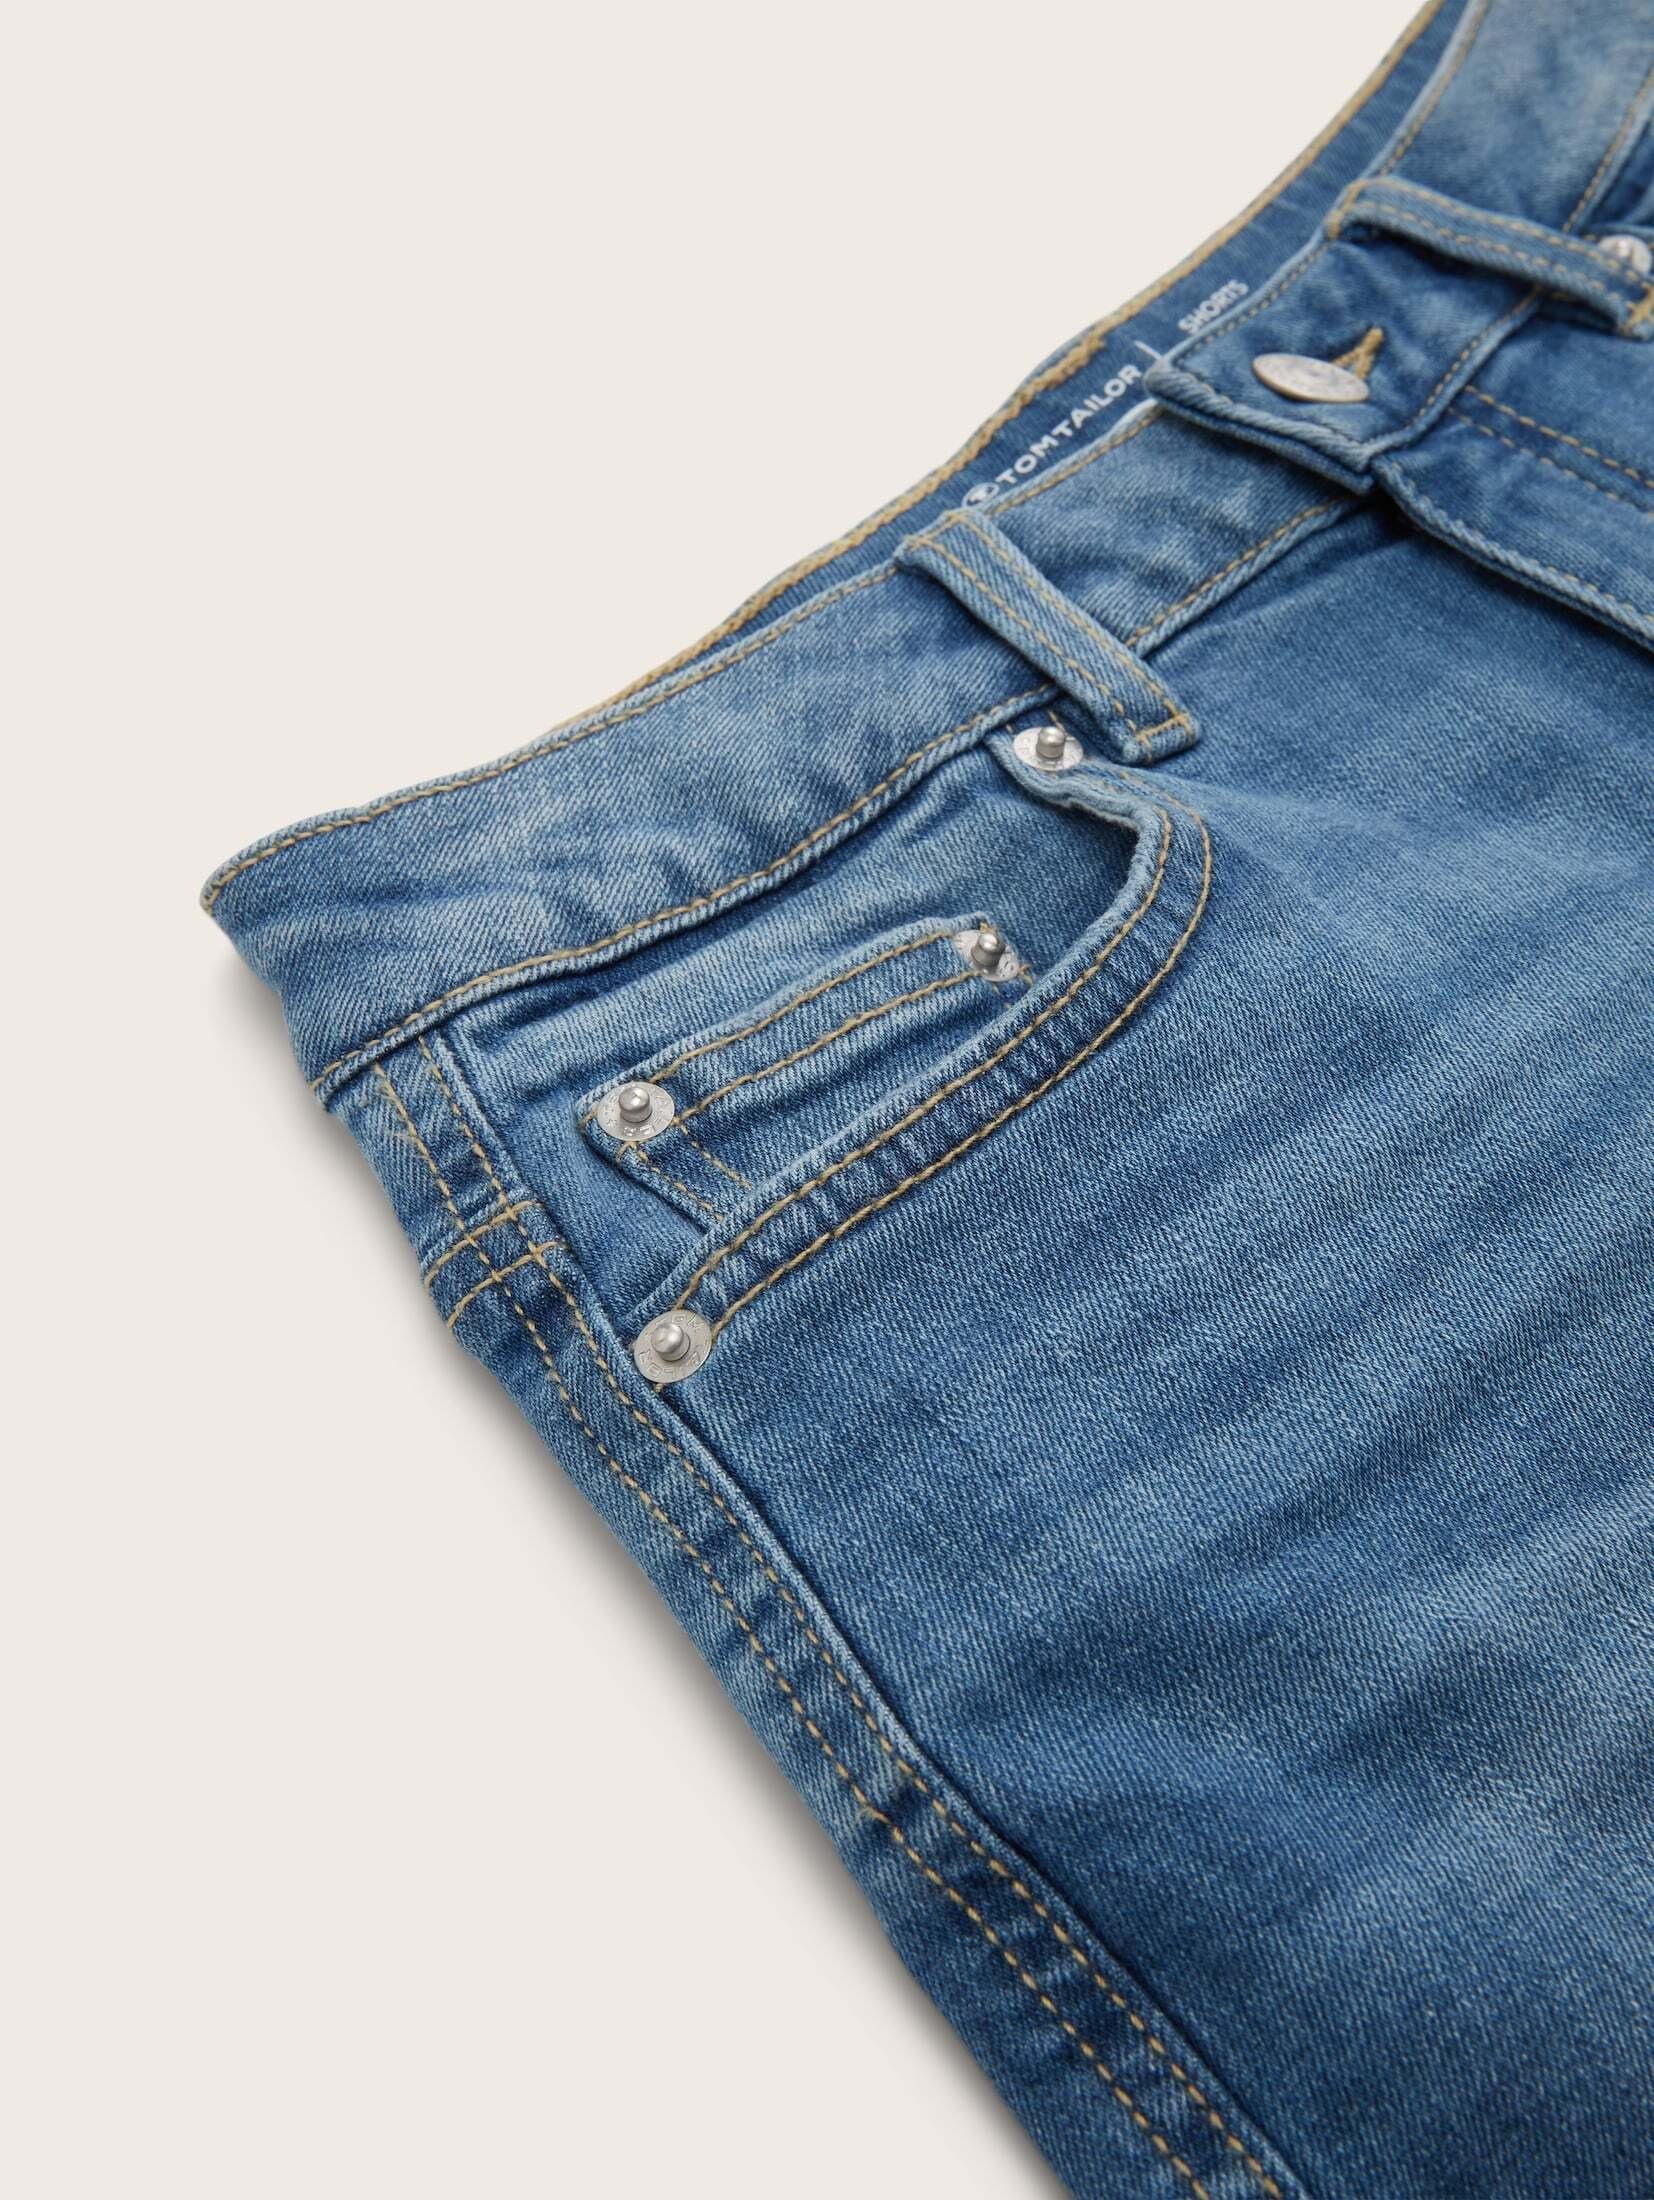 Waschung Used TOM mit Mid leichter Denim TAILOR Jeansshorts Jeansshorts Blue Stone